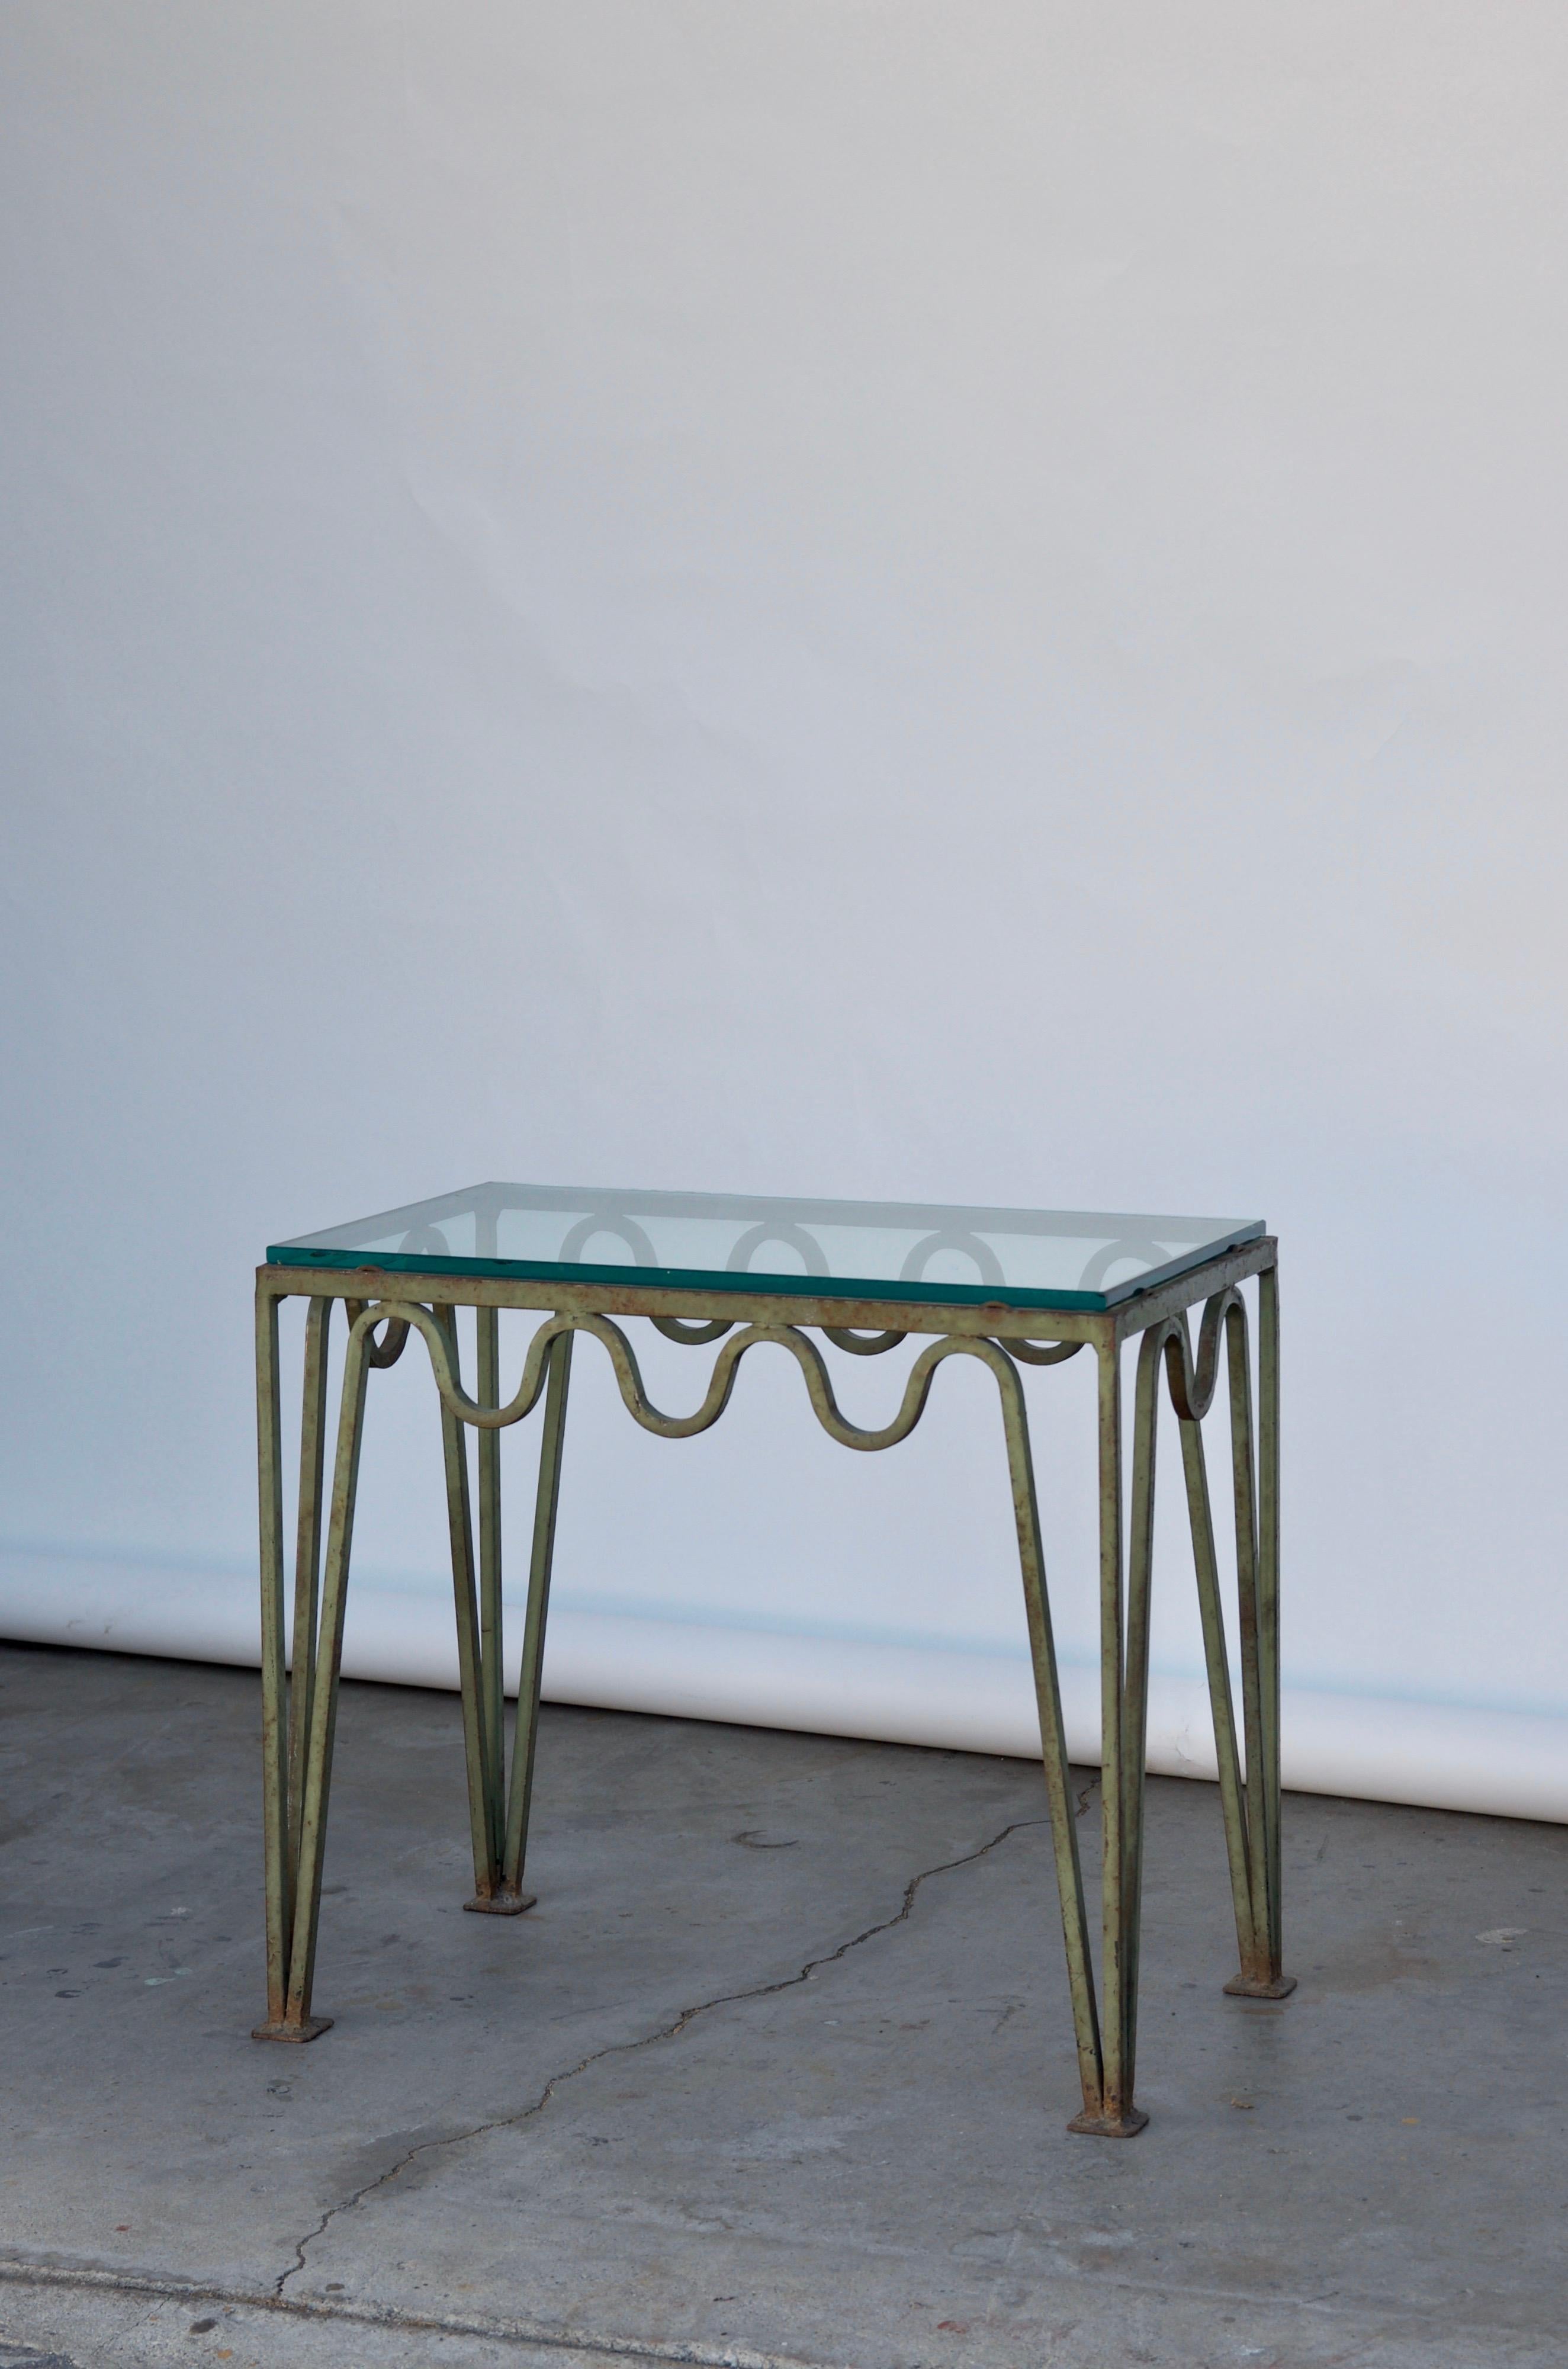 Pair of 'Méandre'™ verdigris steel and glass side tables by Design Frères®.